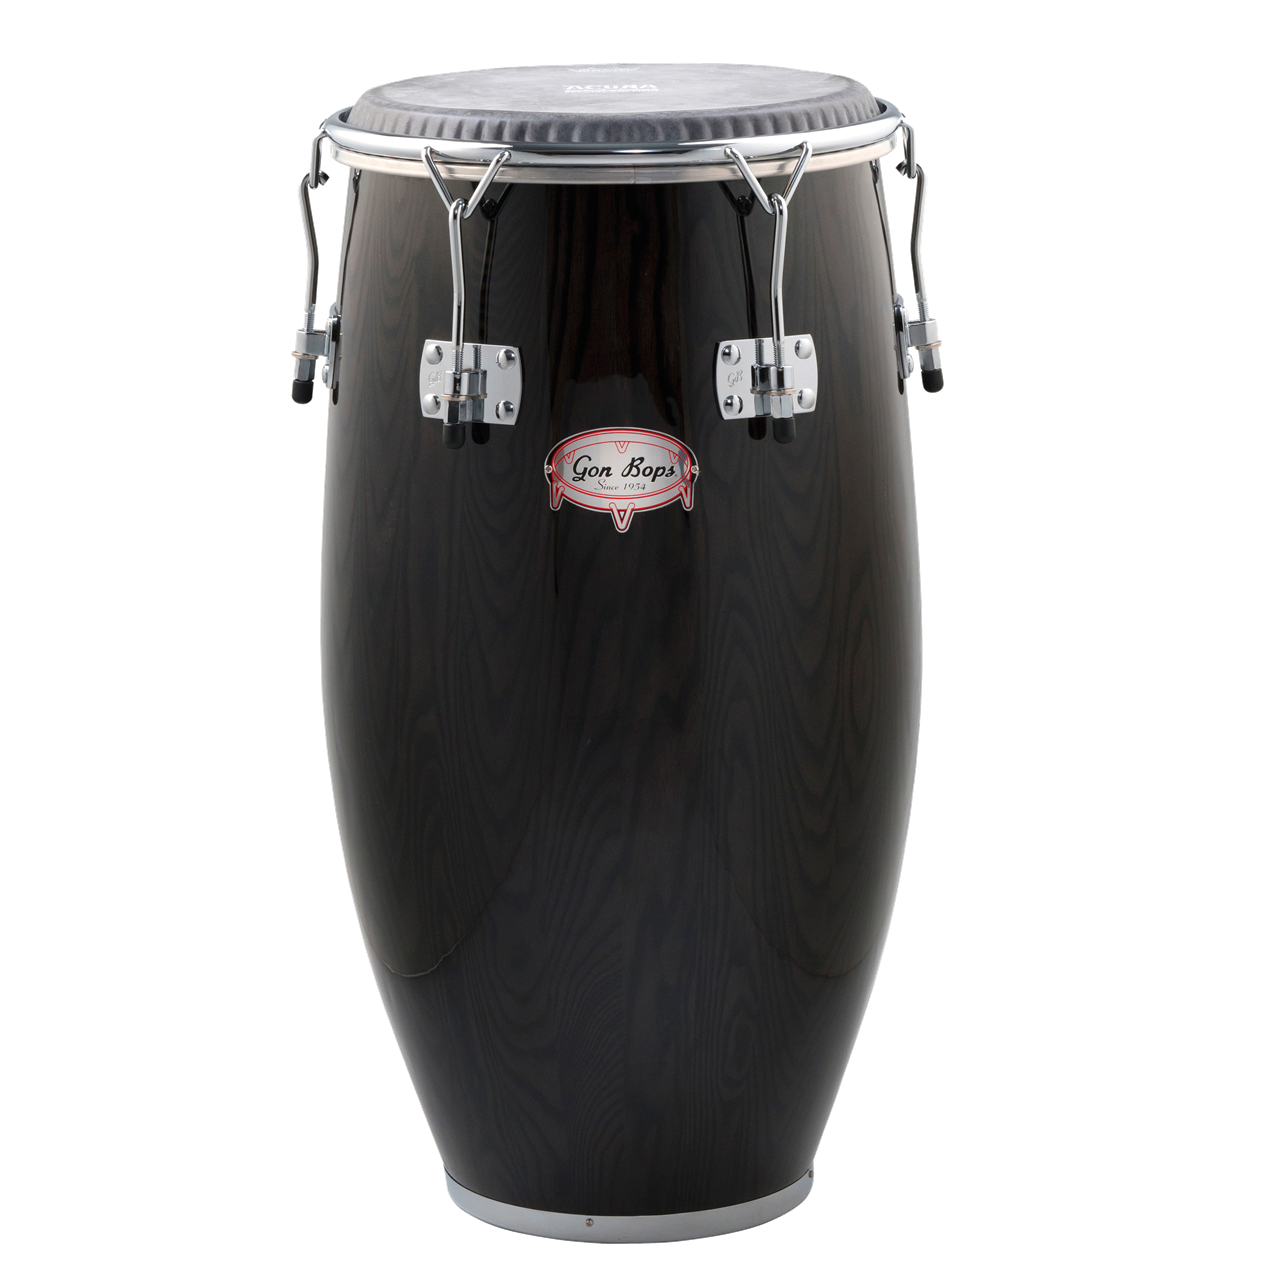 Gon Bops Alex Acuna Special Edition Serie, Tumba 12.25"